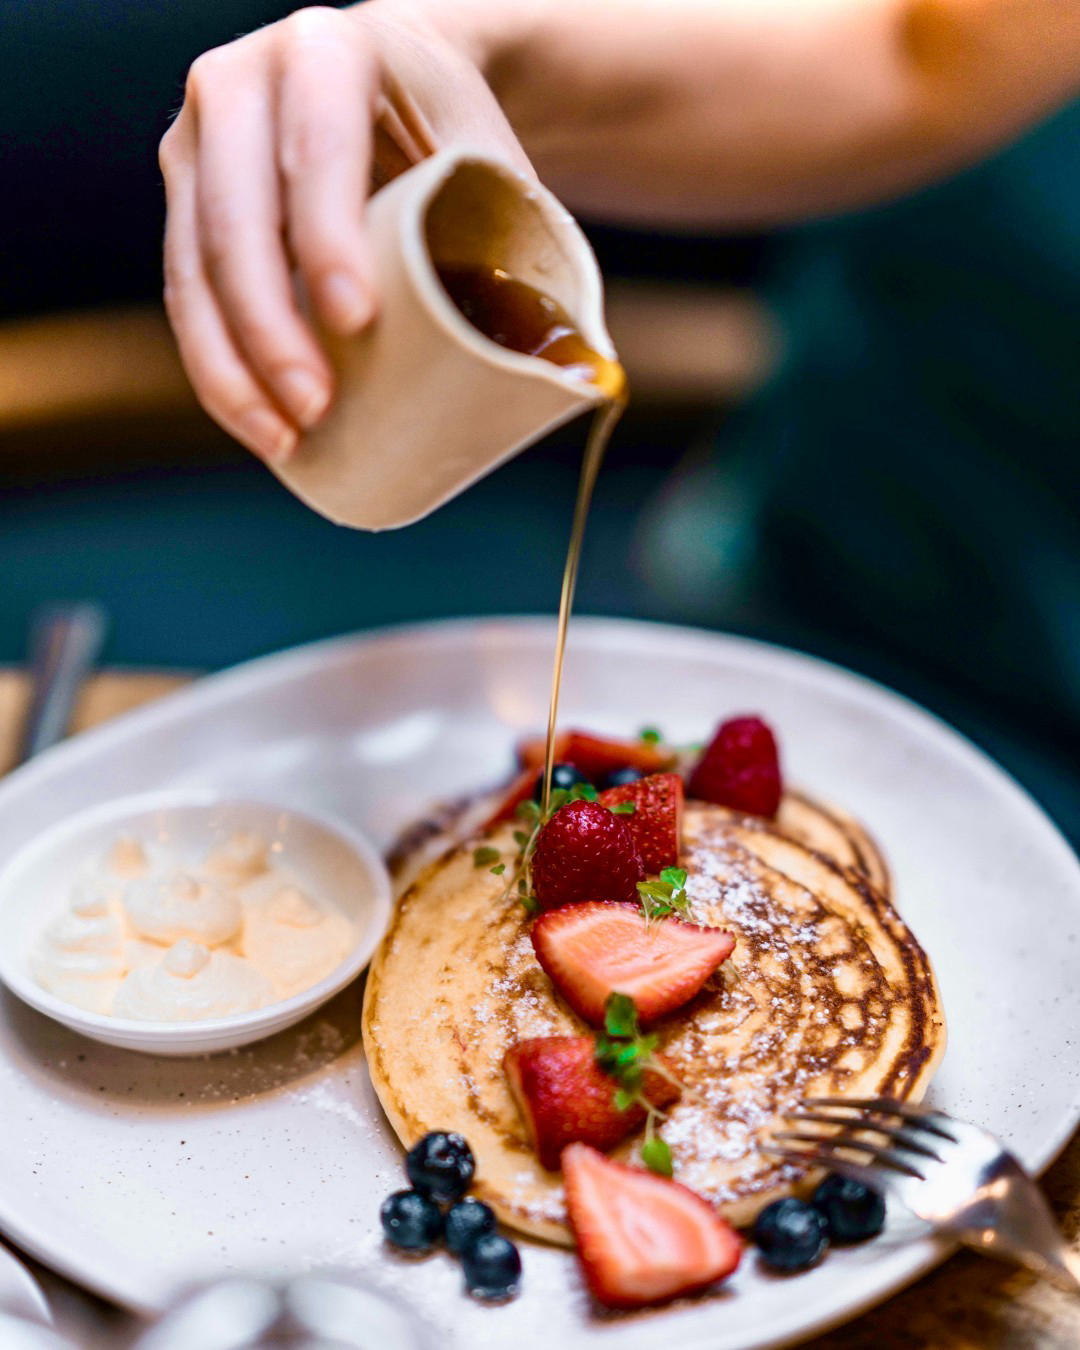 Start your morning right with our wholesome, ricotta whipped pancakes